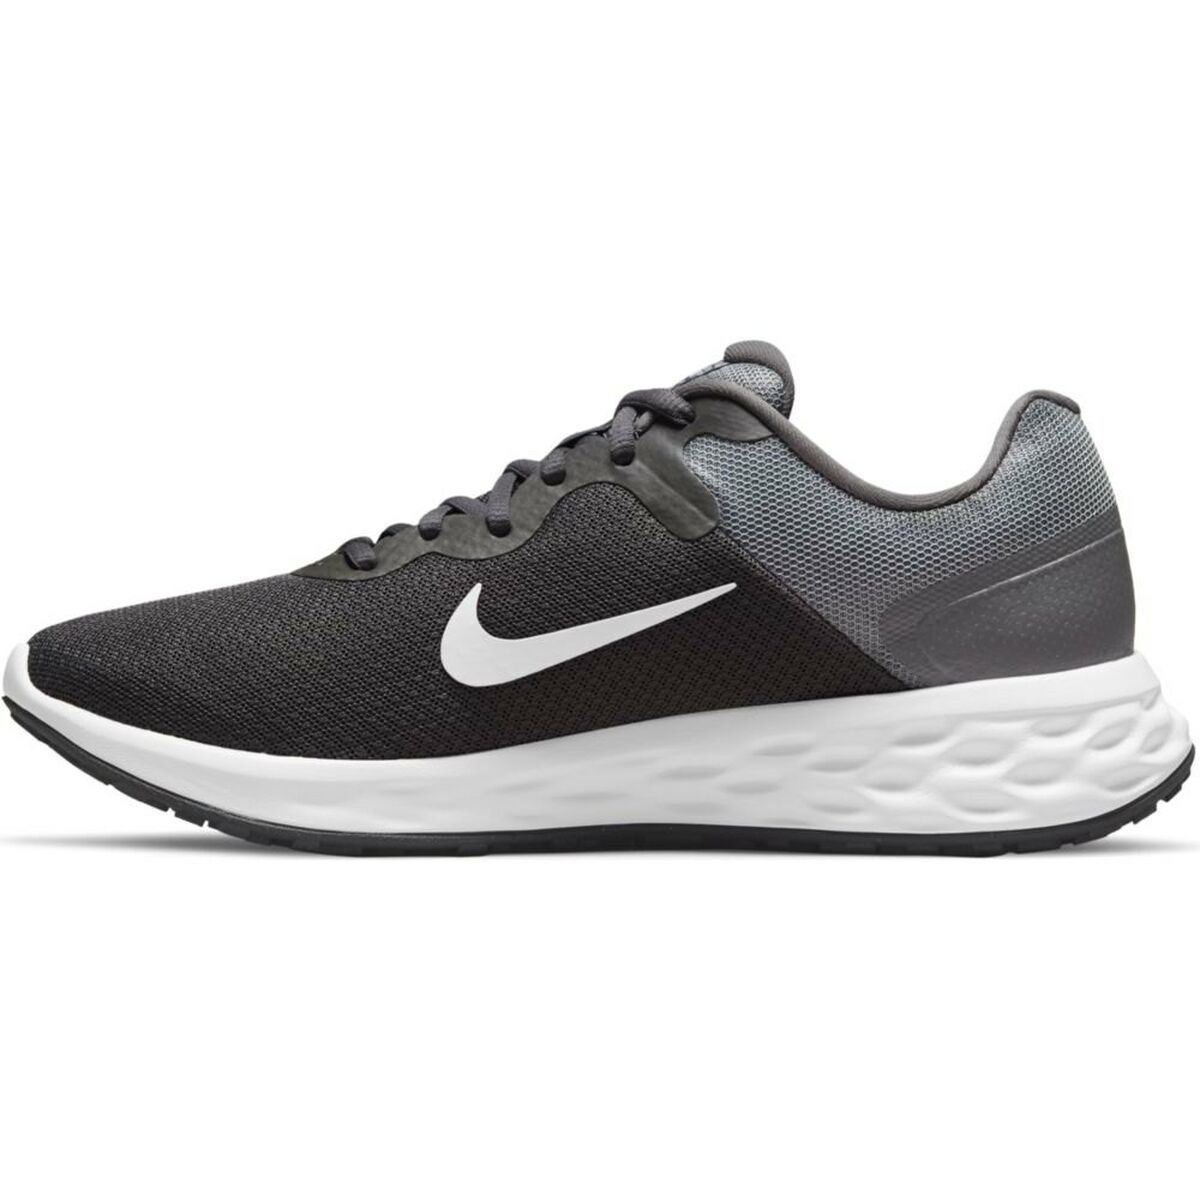 Running Shoes for Adults Nike DC3728 004 Revolution 6 Grey